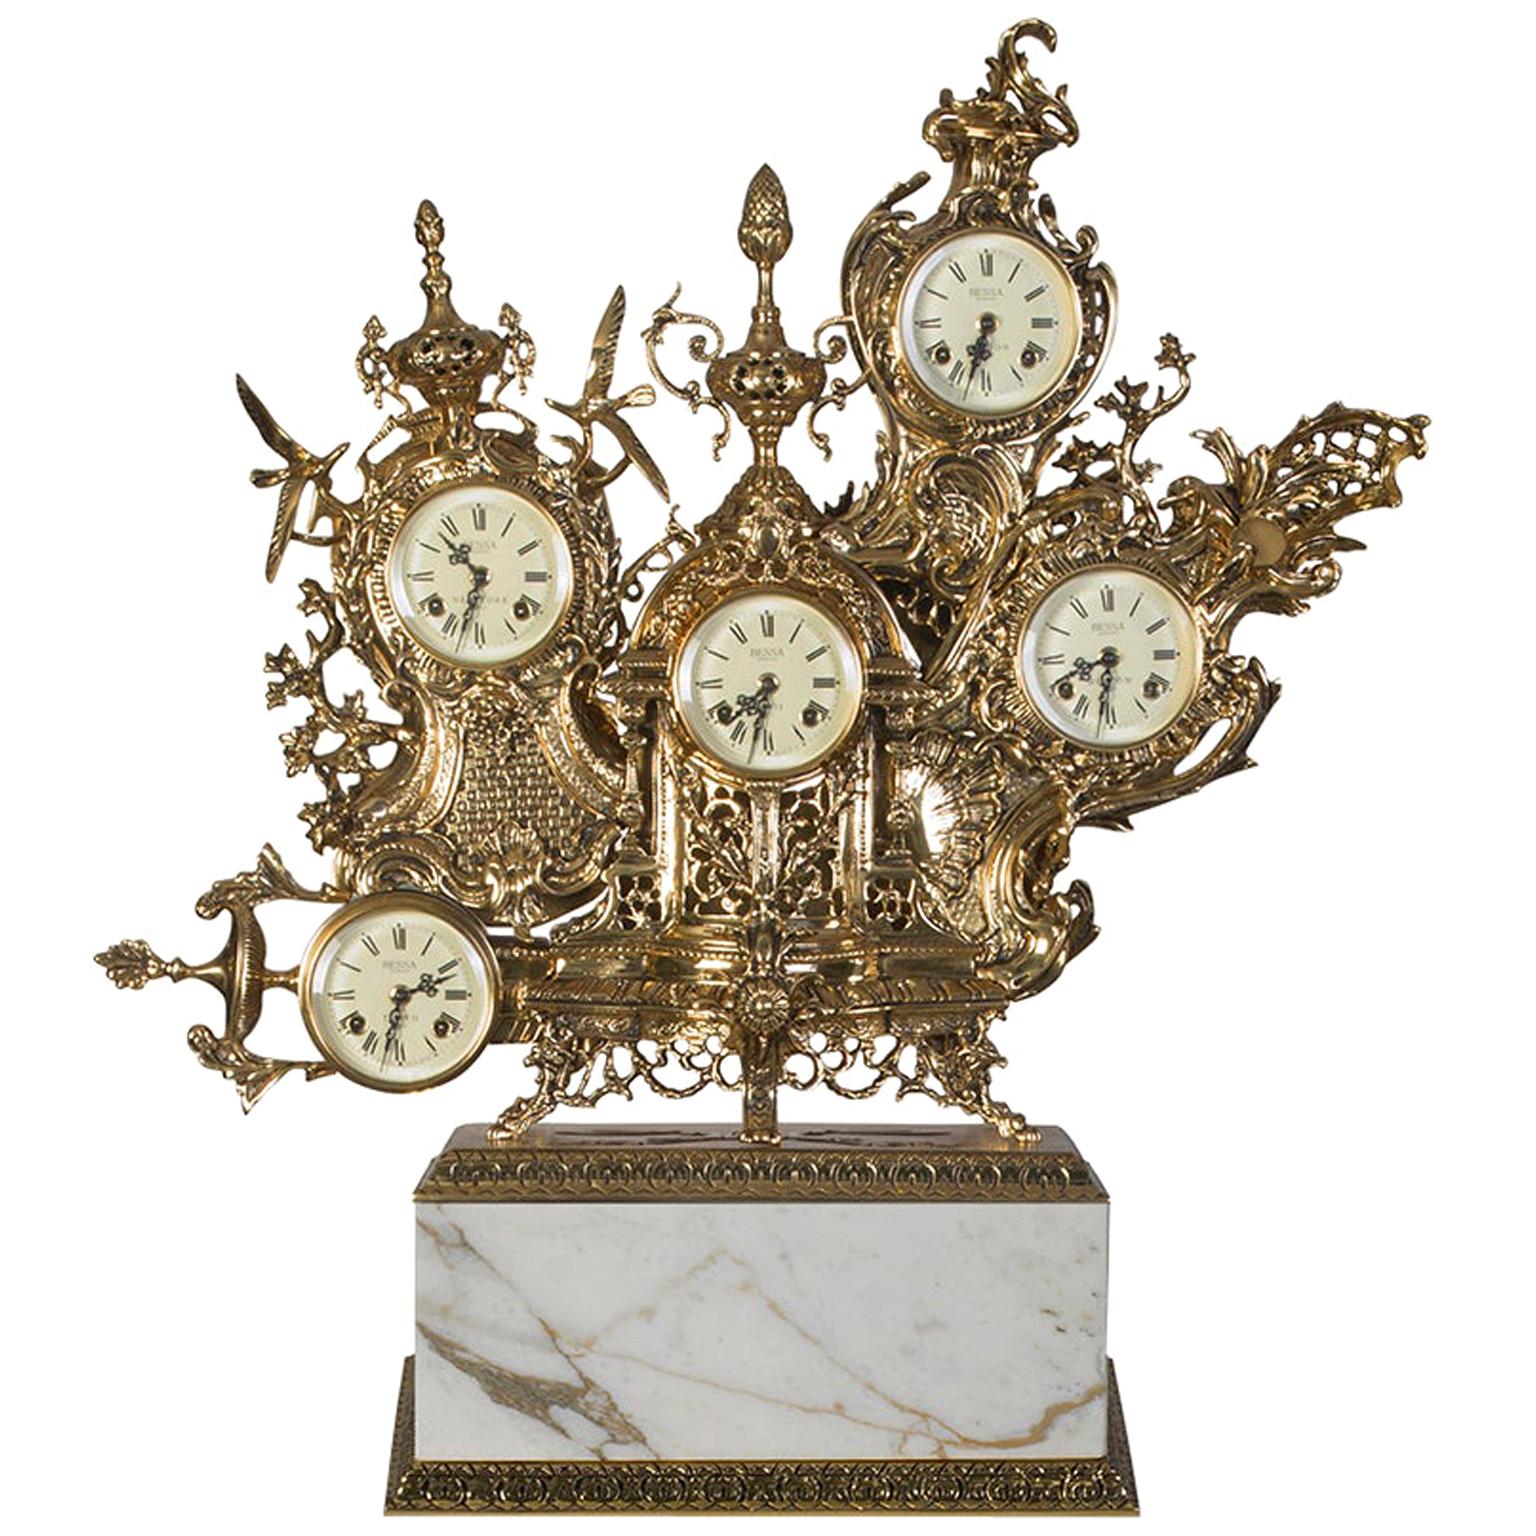 Classic Grandfather Mantel Clock, Patinated Polished Brass and Calacatta Marble